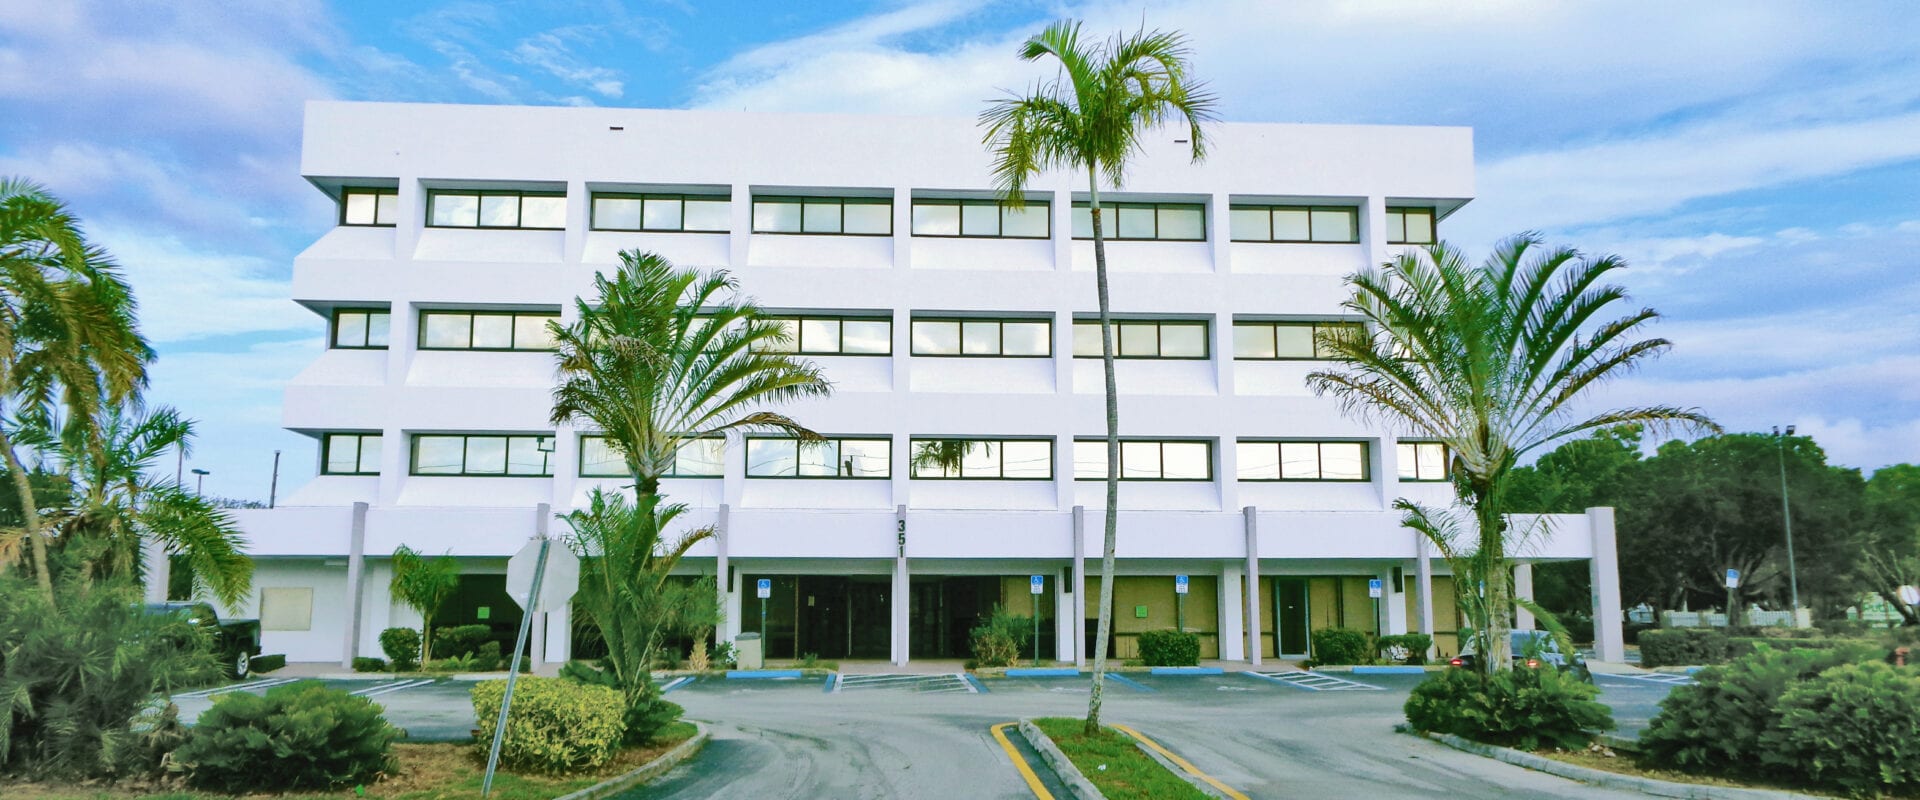 For Lease Office Space Pompano Beach 232 SF